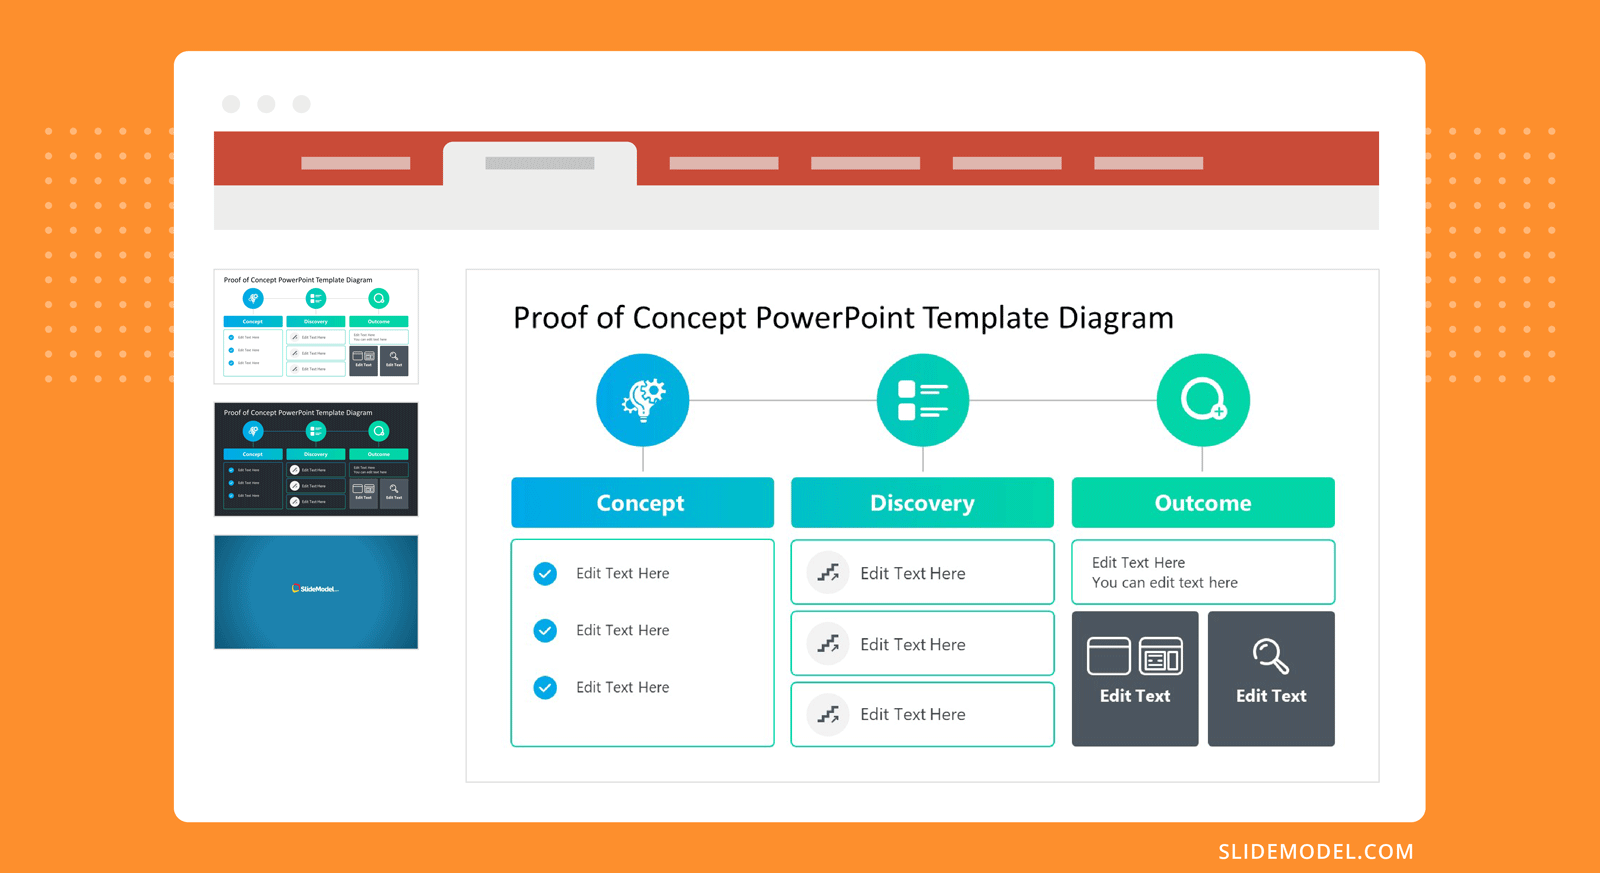 POC template - Proof of Concept Presentation template design for PowerPoint